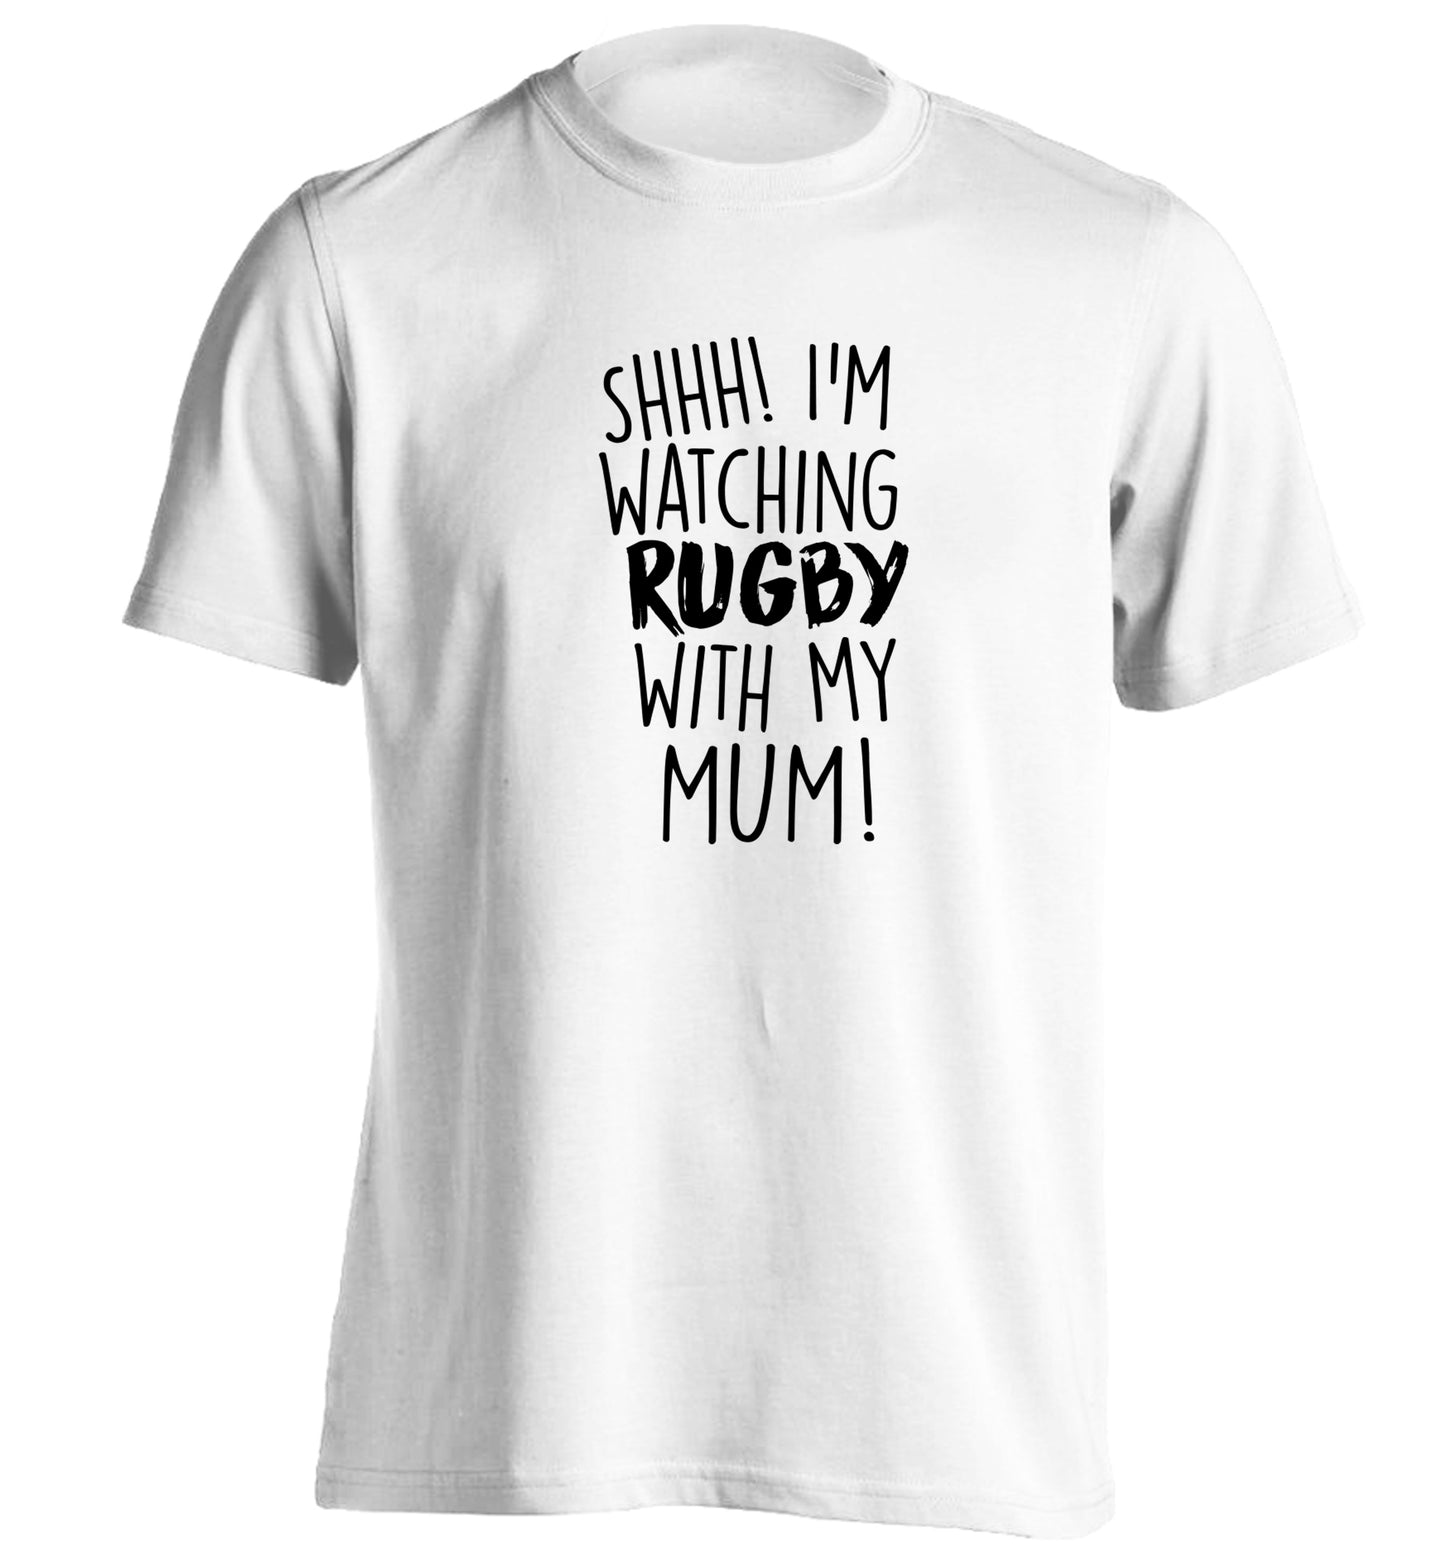 Shh... I'm watching rugby with my mum adults unisex white Tshirt 2XL